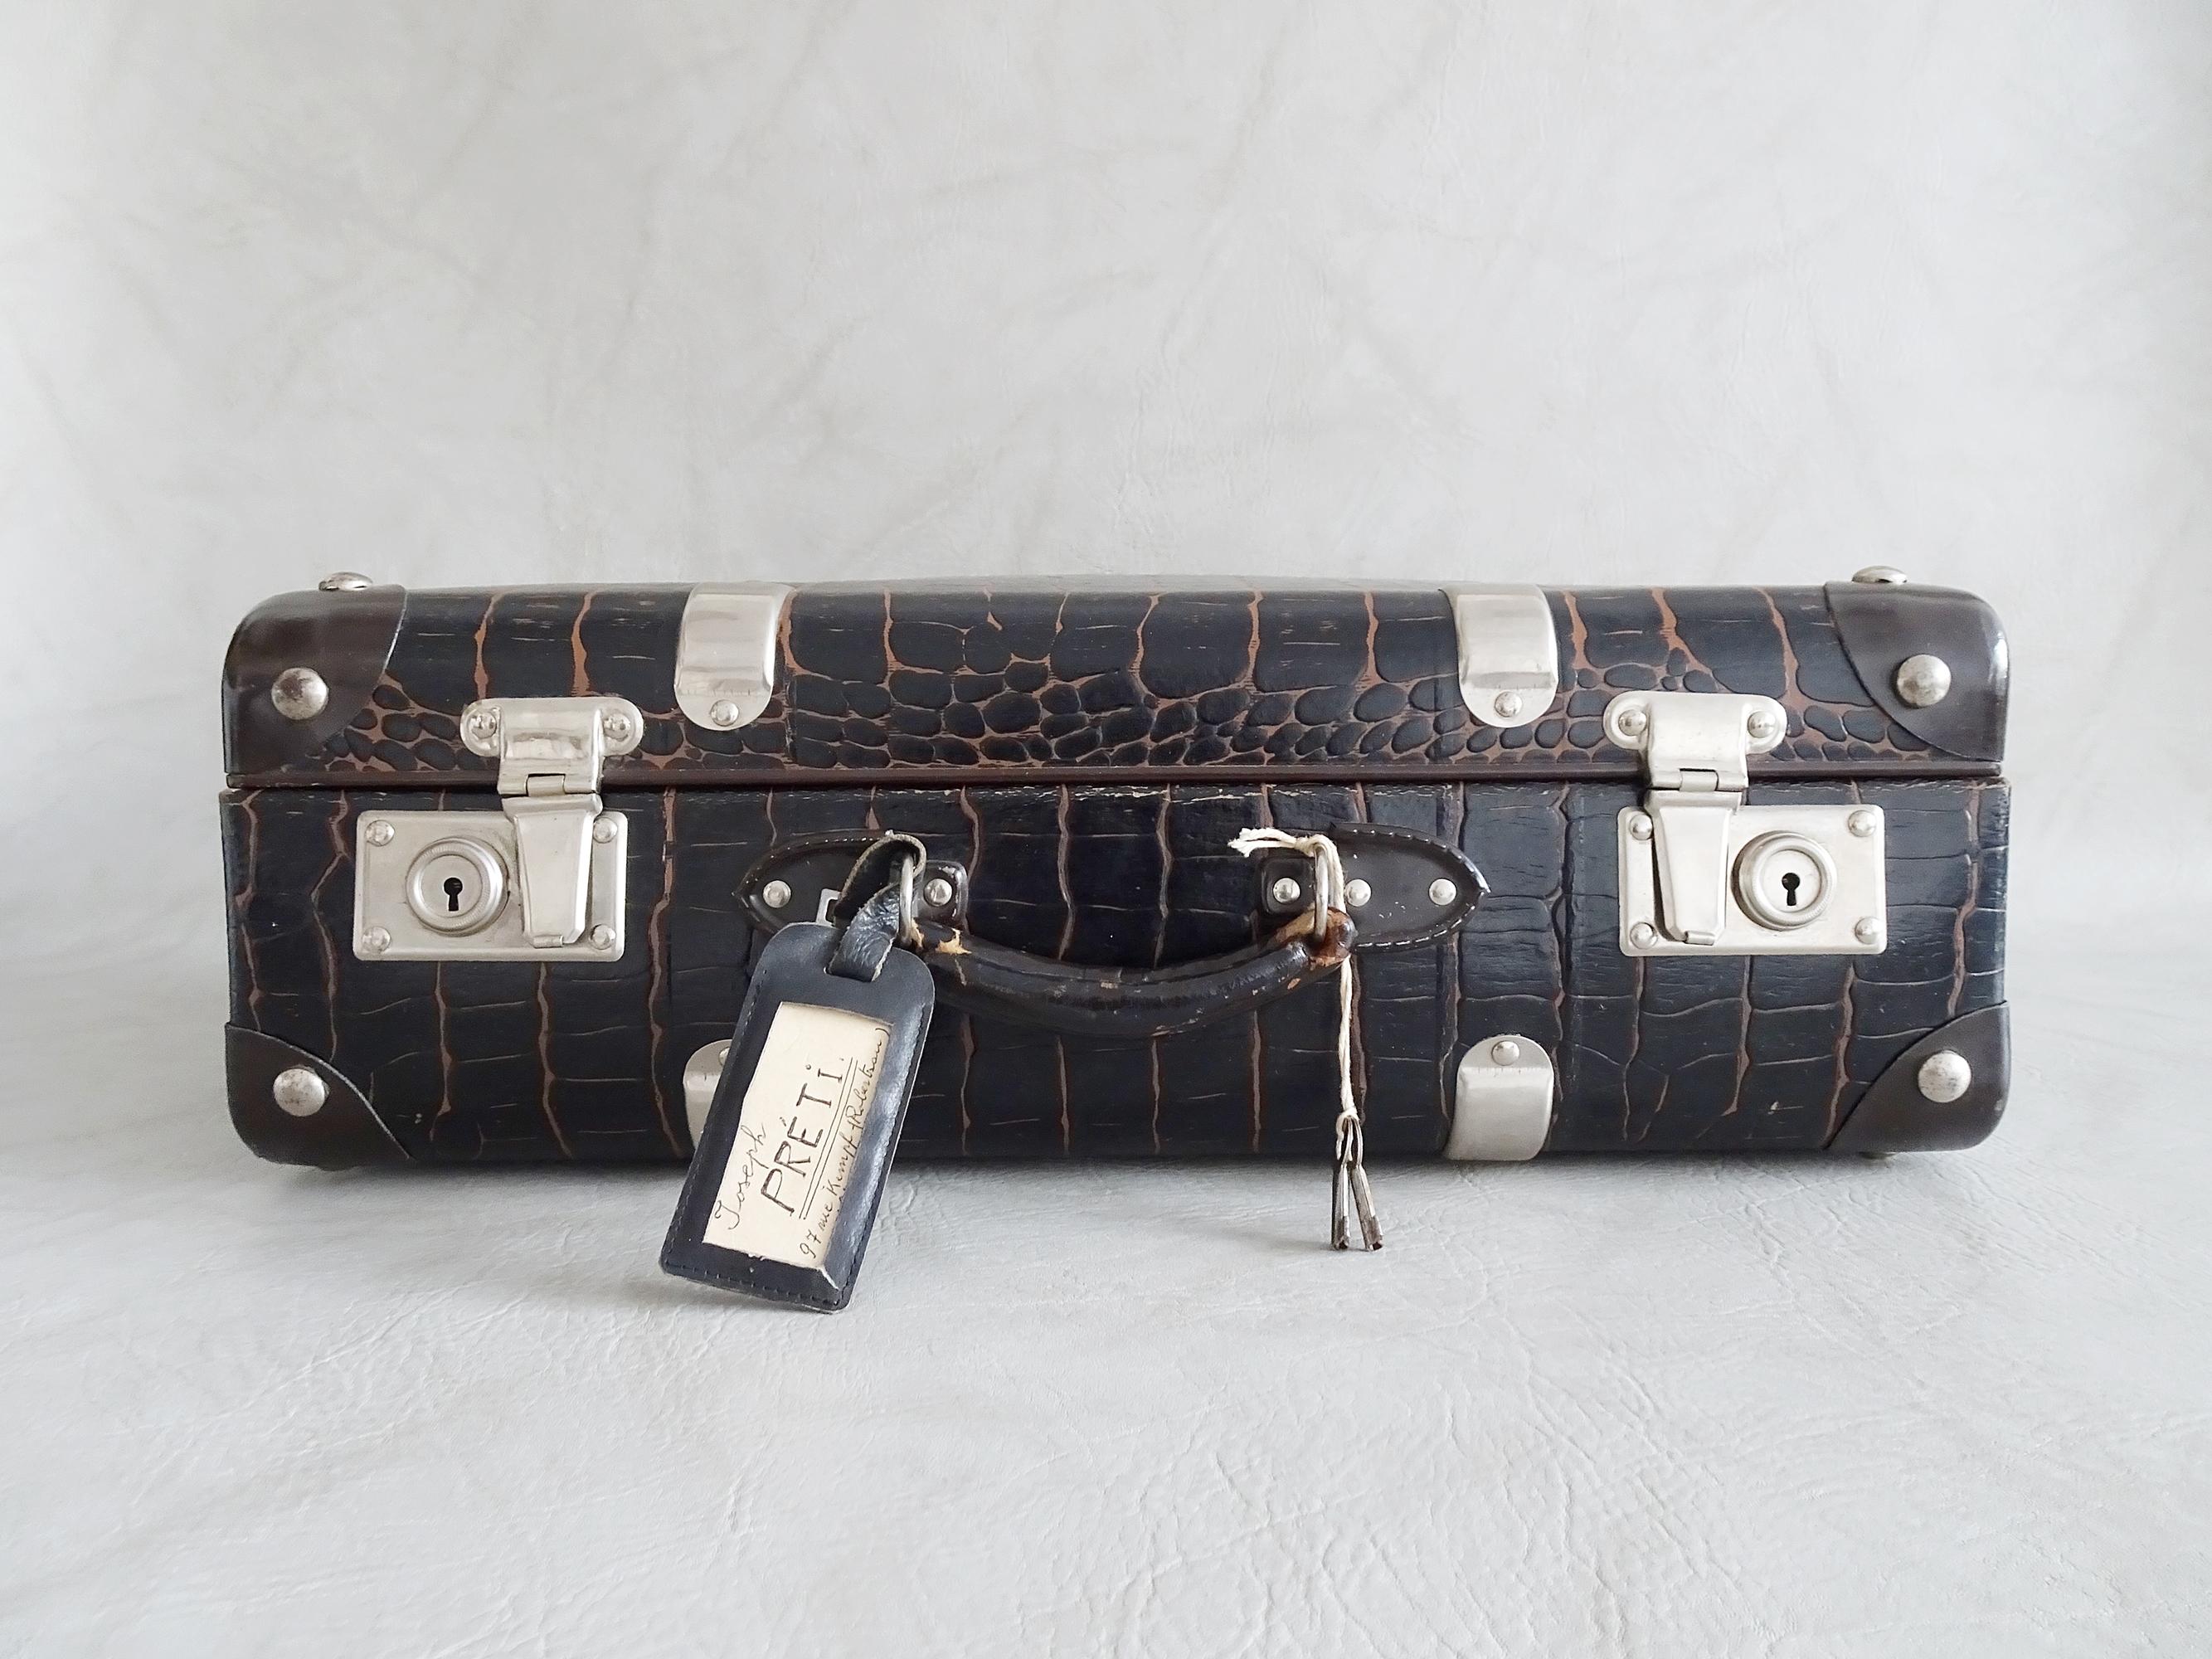 Brown Art Deco suitcase with a reptile pattern - an original piece for travel or as home decor. Hard cardboard shell with metal details, two keys and a brown leather luggage tag. The locking function is perfect. The interior is very well preserved